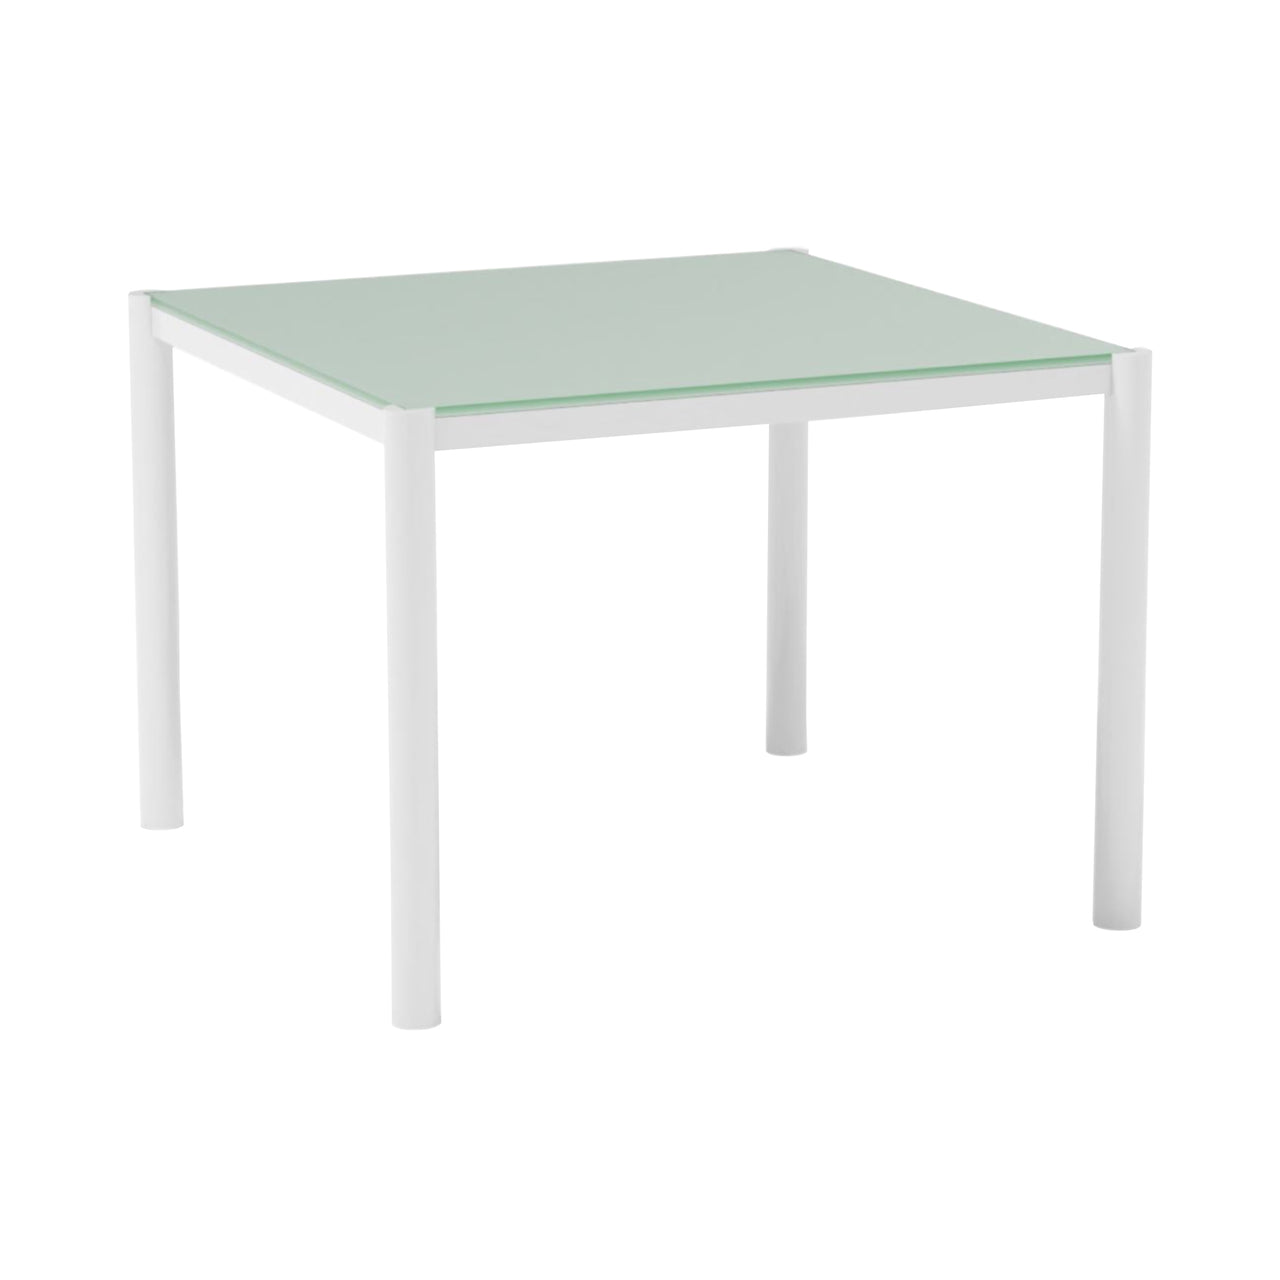 Get-Together Dining Table: Square + Clear Glass + White